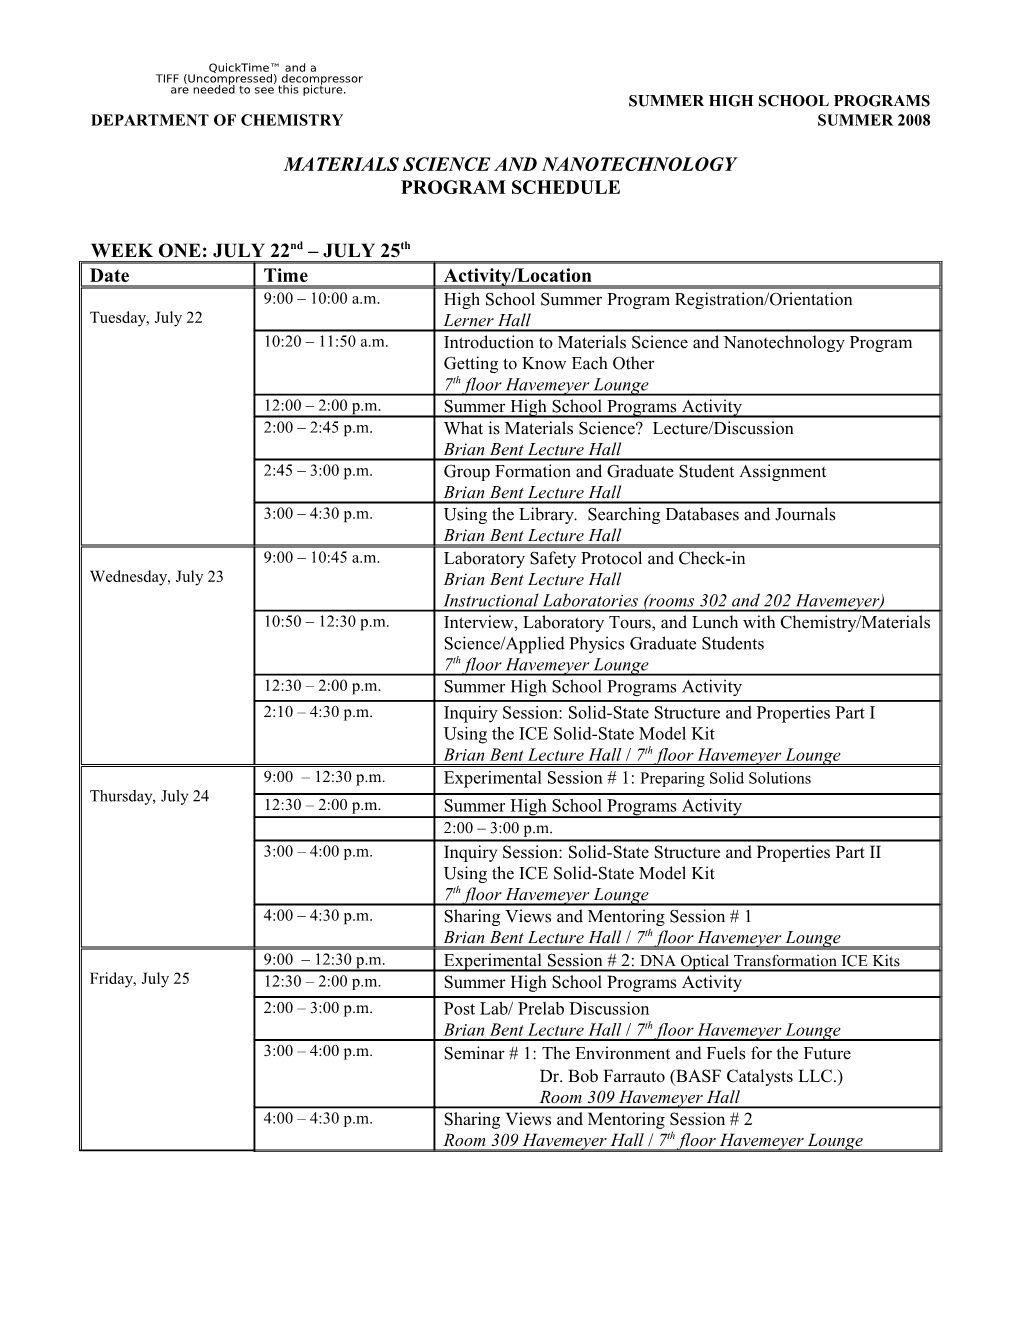 Program Schedule and Assignments